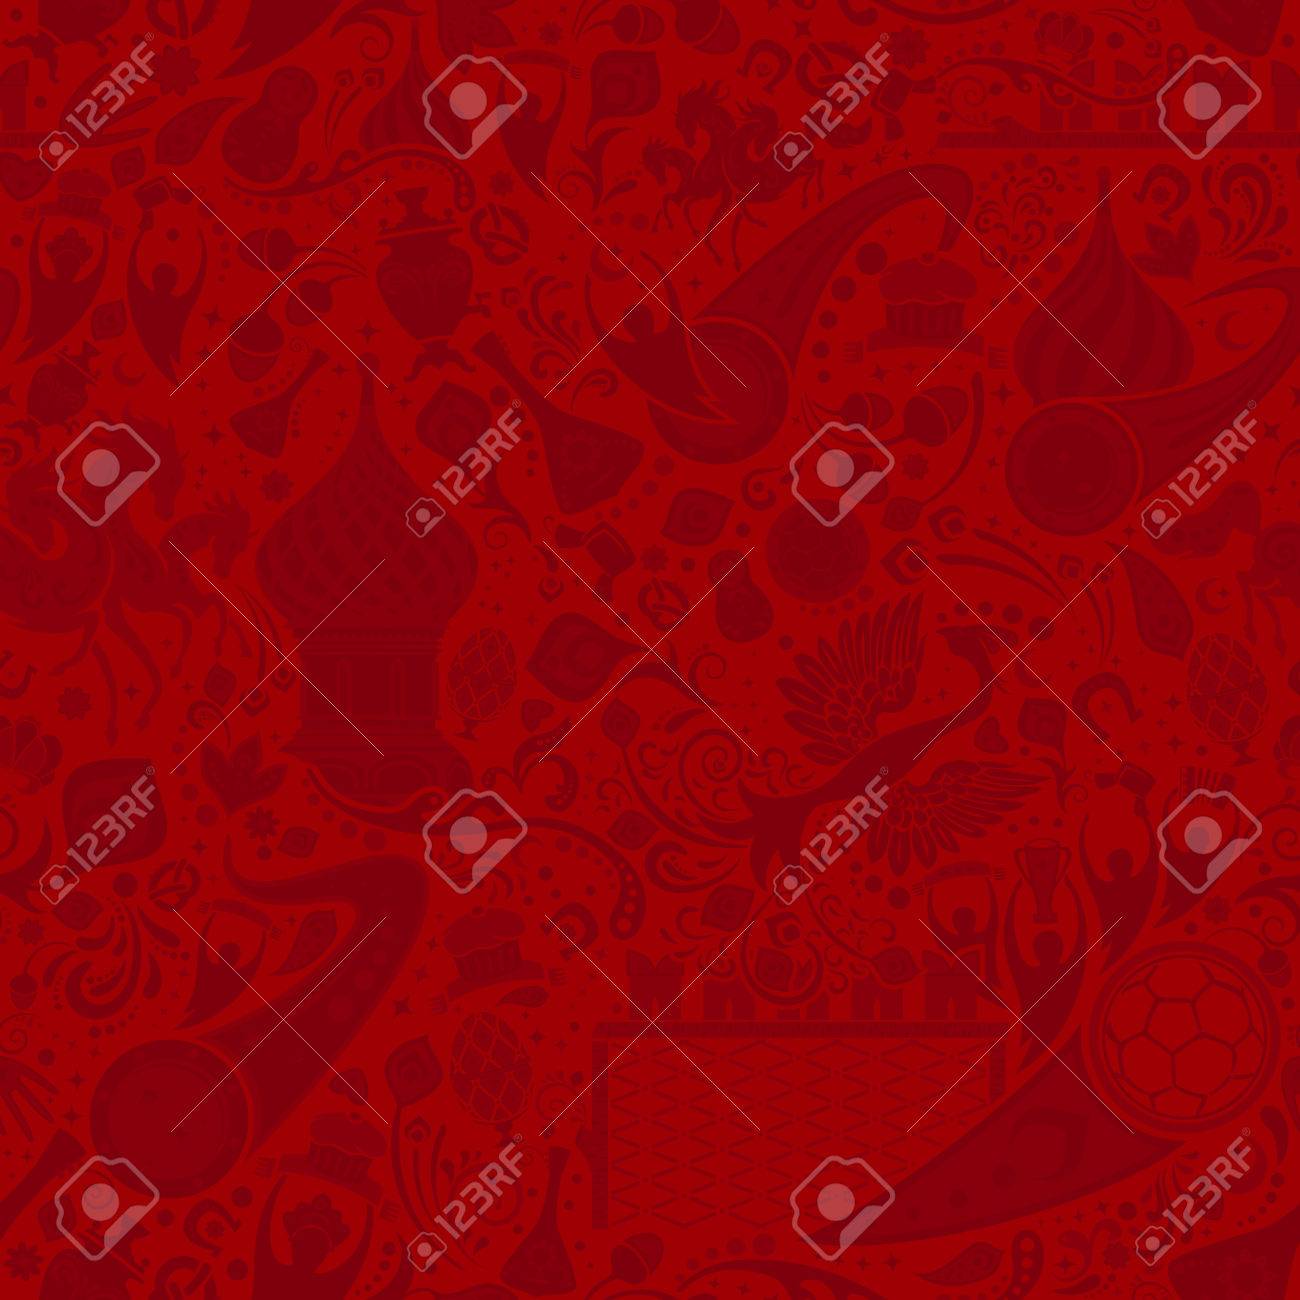 Russian Red Seamless Pattern World Of Russia Background With